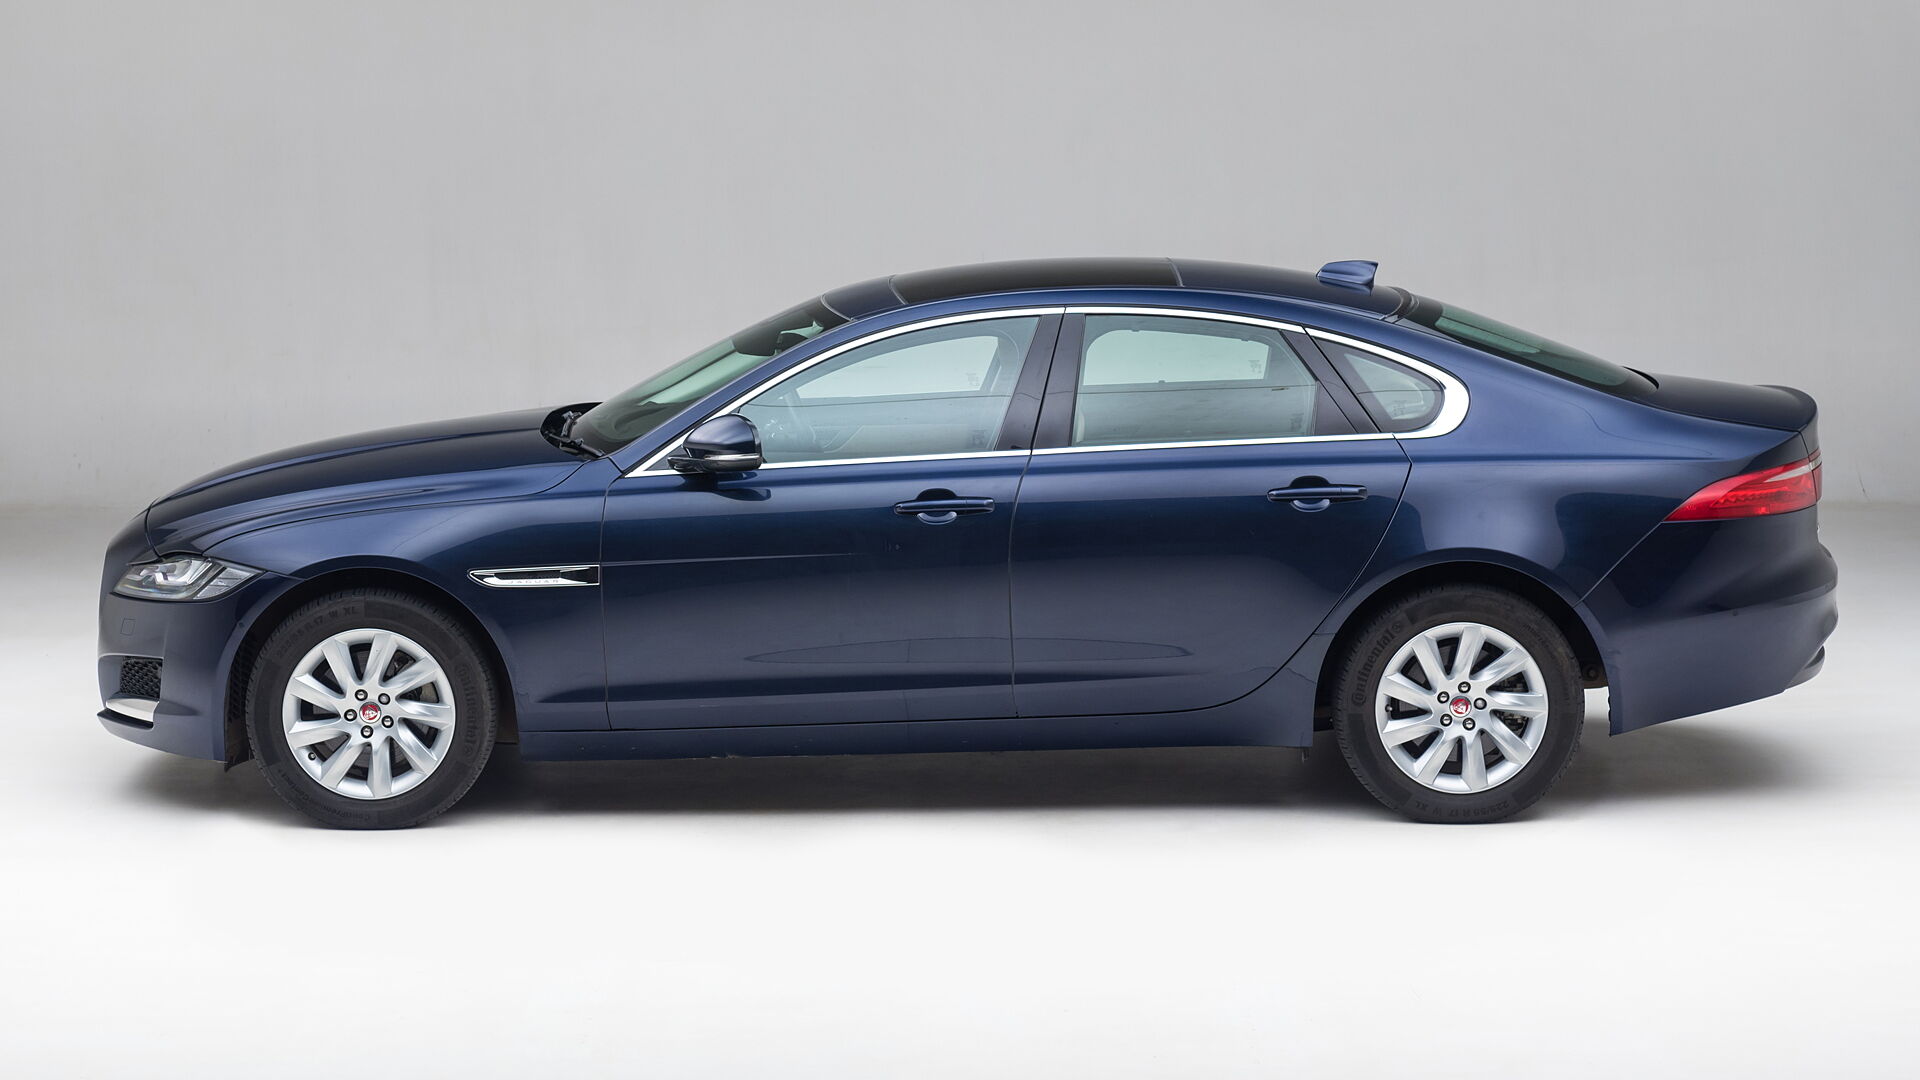 Jaguar XF: Price, Specifications, Features